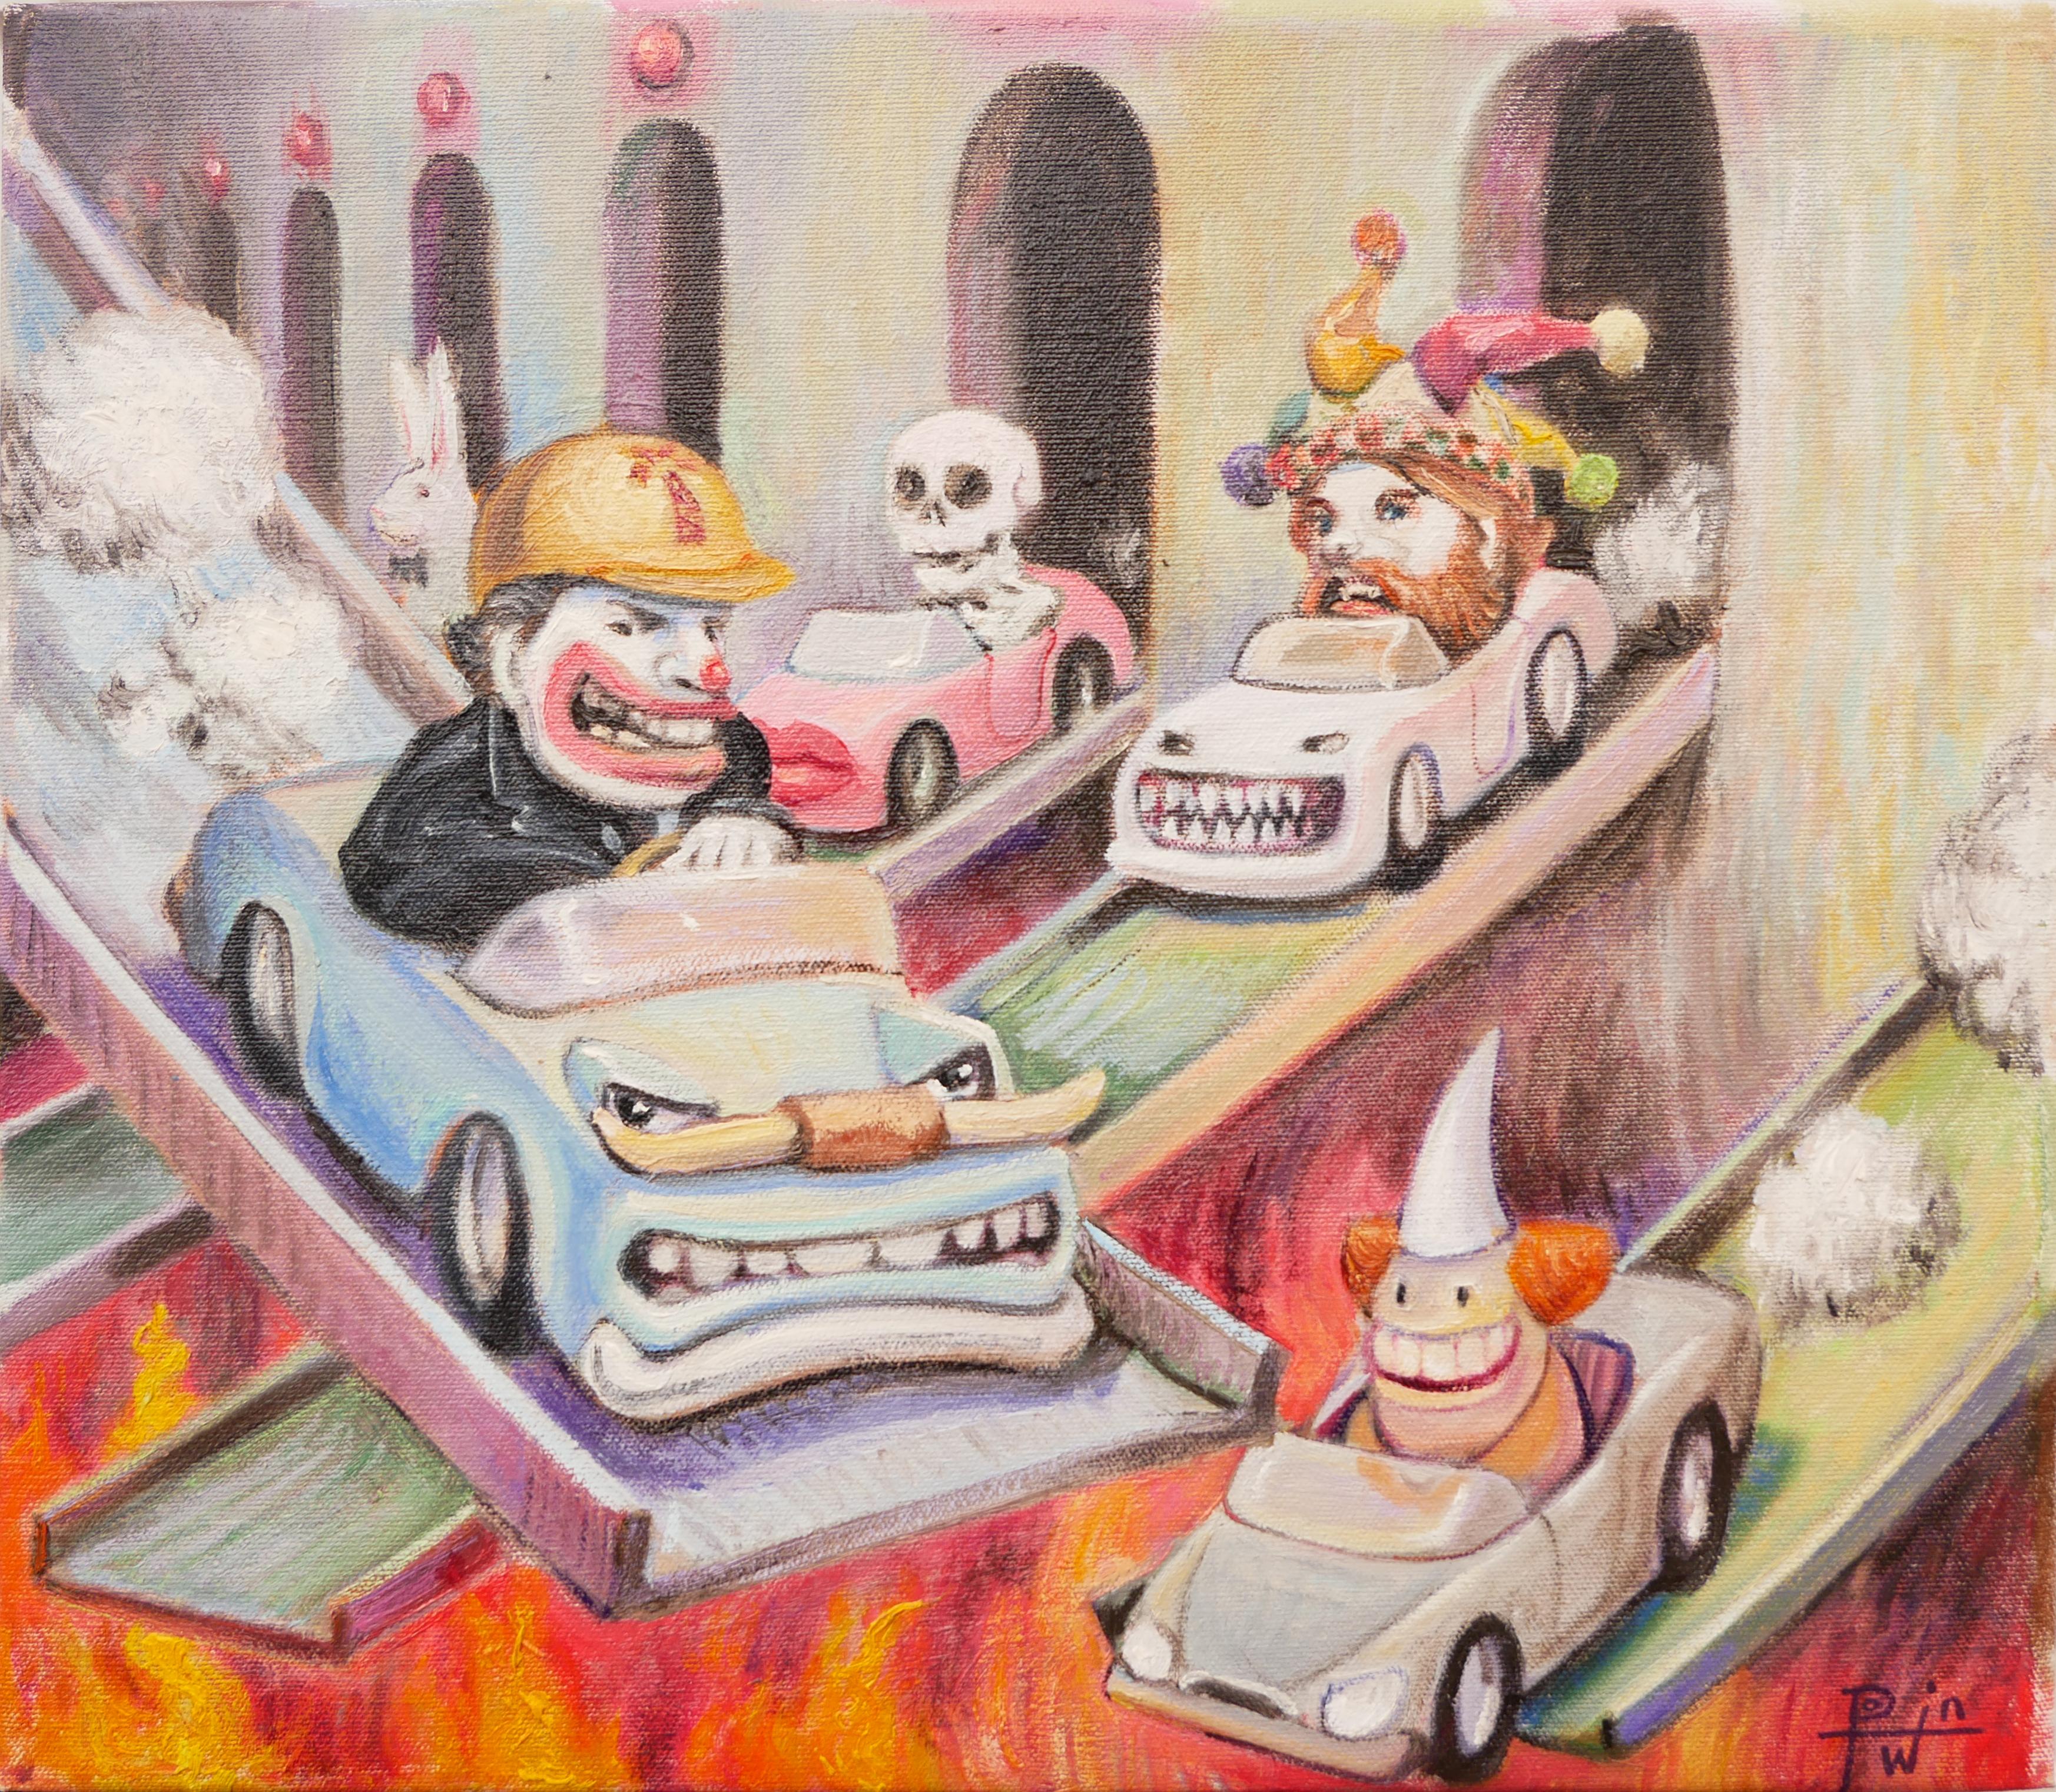 Henry David Potwin Landscape Painting - "Fossil Fuel" Contemporary Pastel Surrealist Cityscape of Clowns Driving Cars